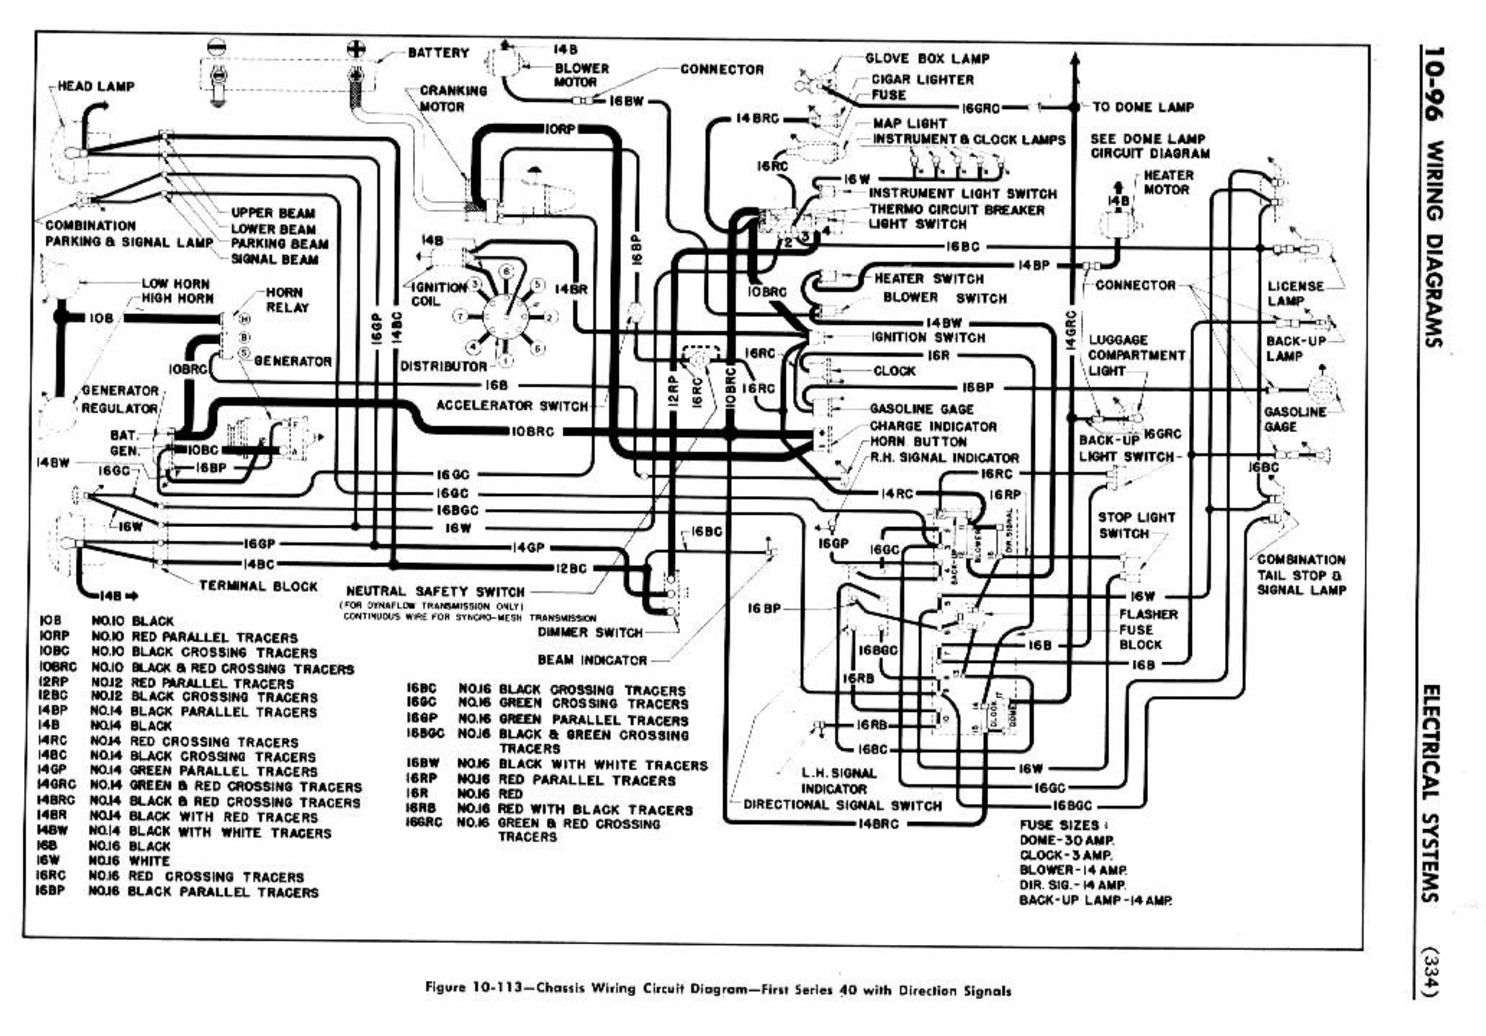 n_11 1950 Buick Shop Manual - Electrical Systems-096-096.jpg